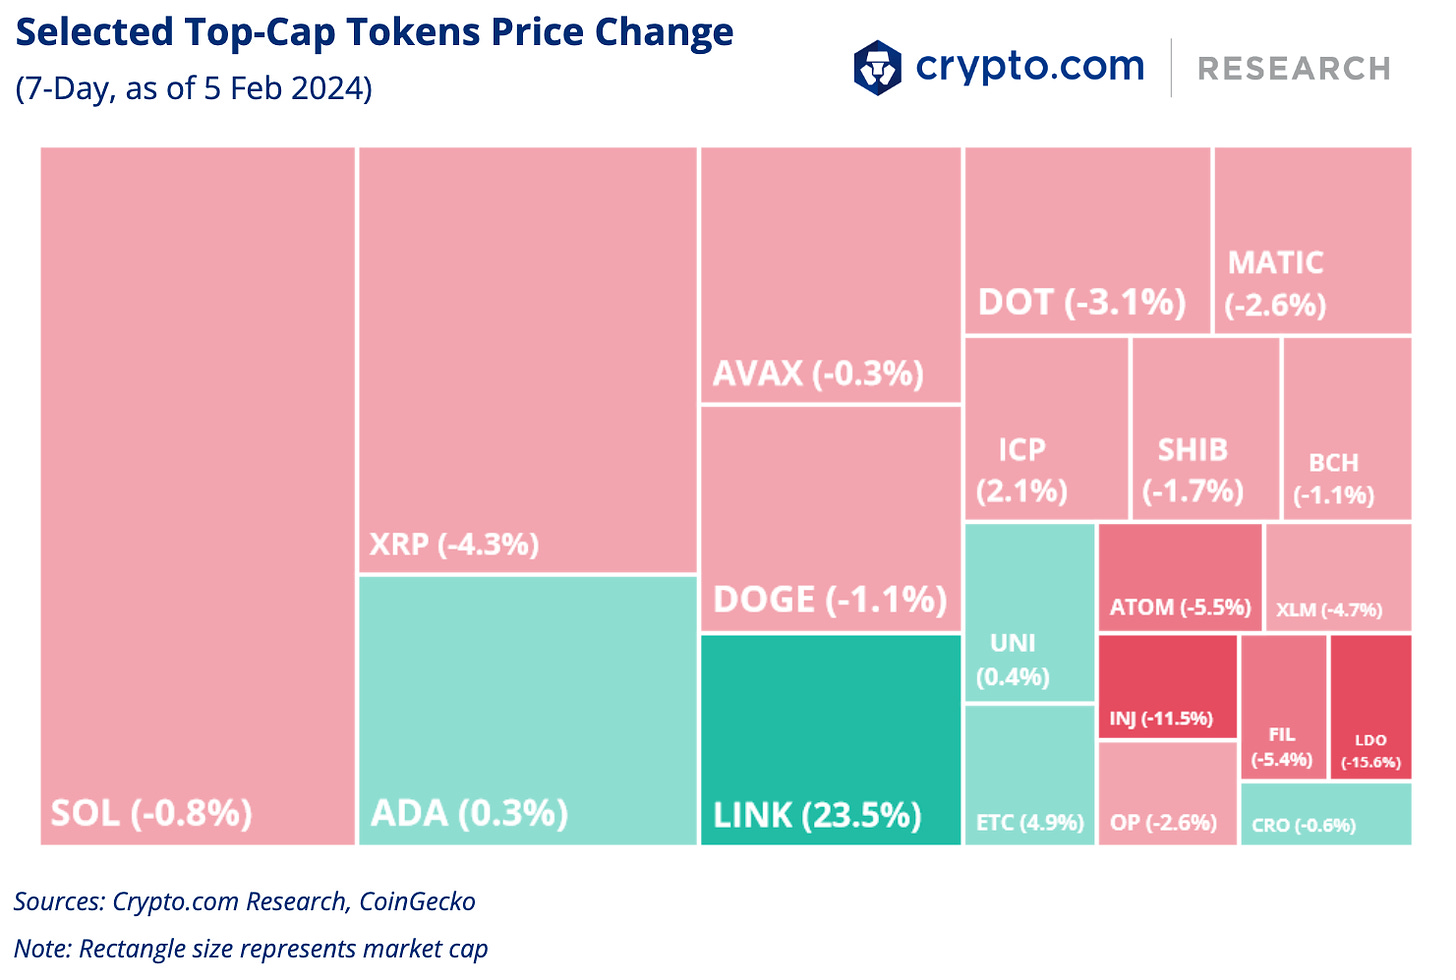 Crypto.com Selected Top-Cap Tokens Price Change